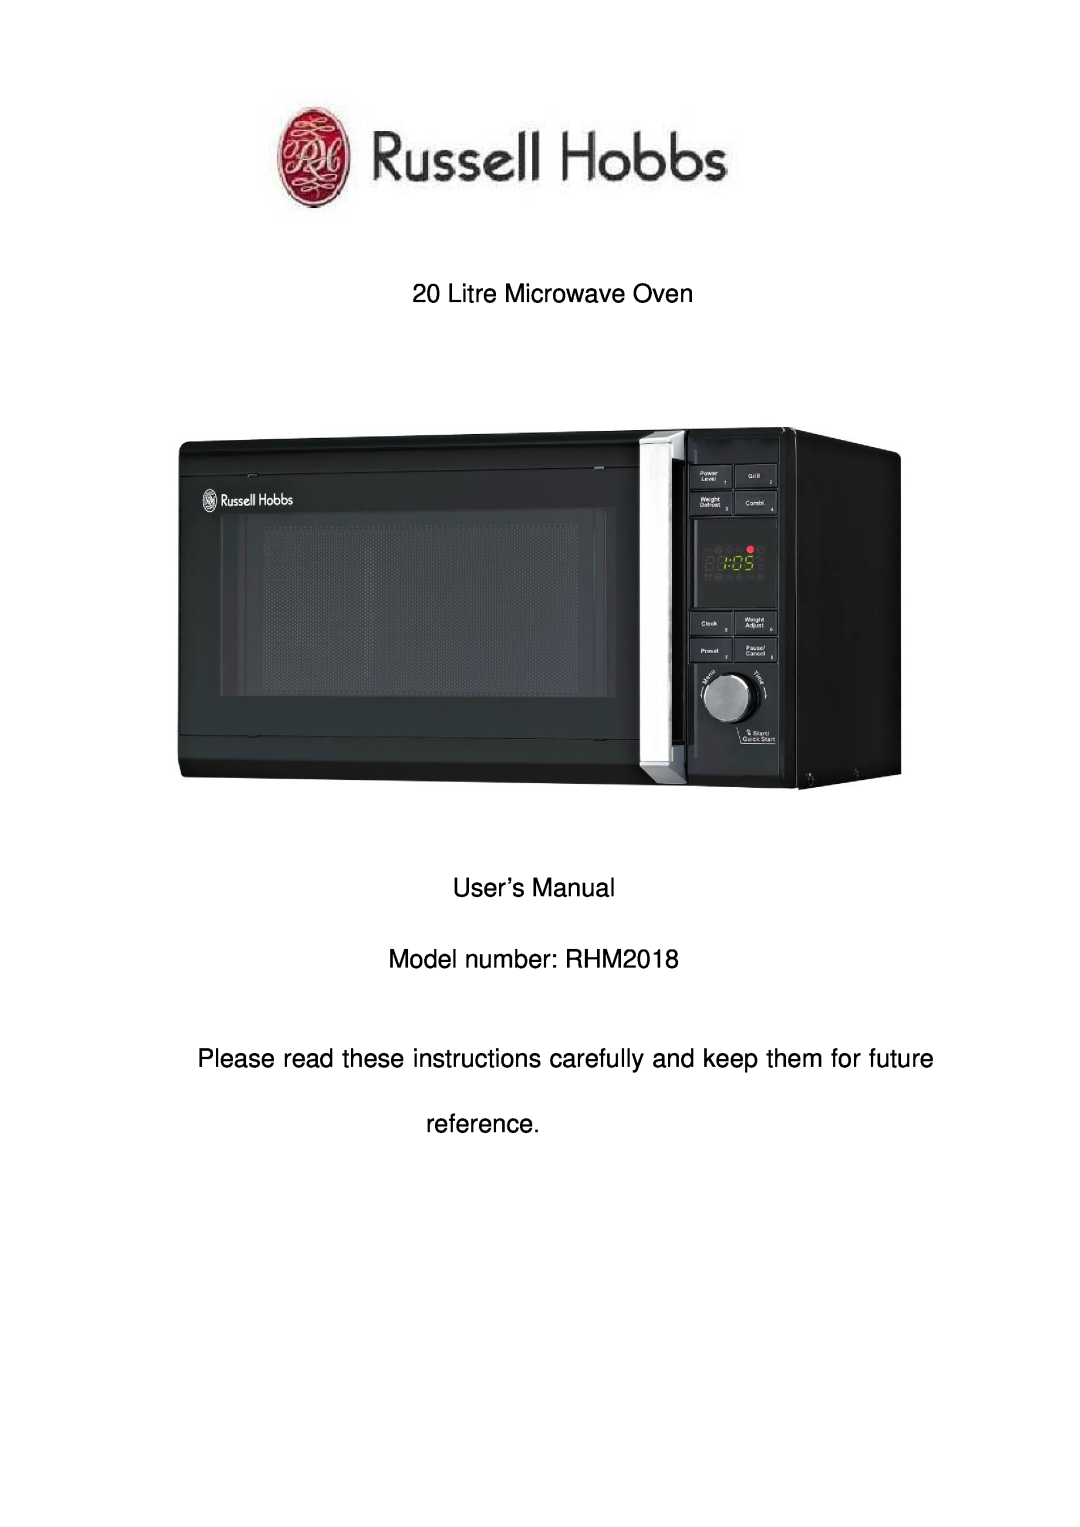 Russell Hobbs RHM2018 instruction manual Please read these instructions carefully and, keep them for future reference 